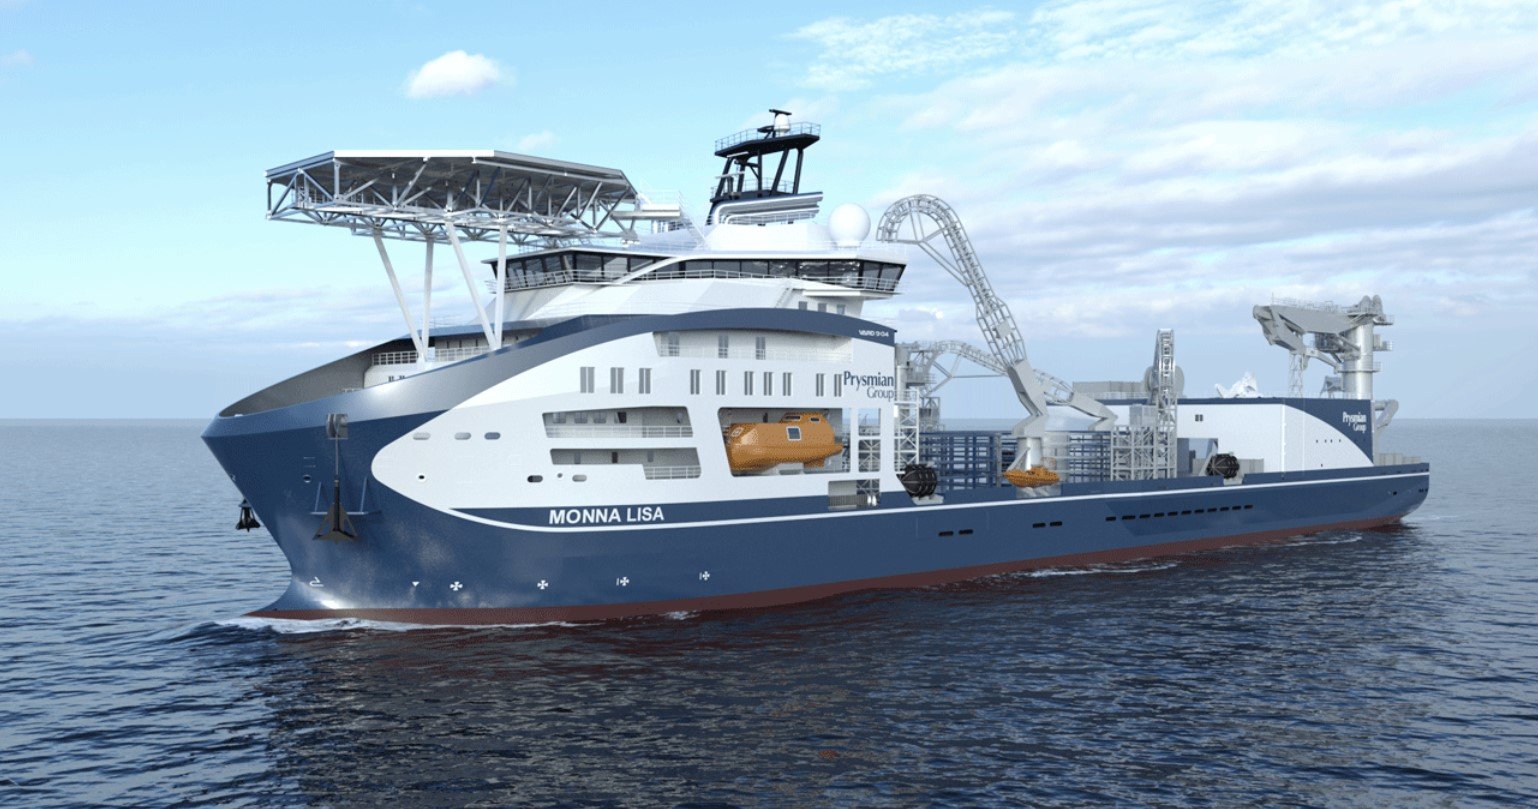 Prysmian's new cable-laying vessel named after famous painting